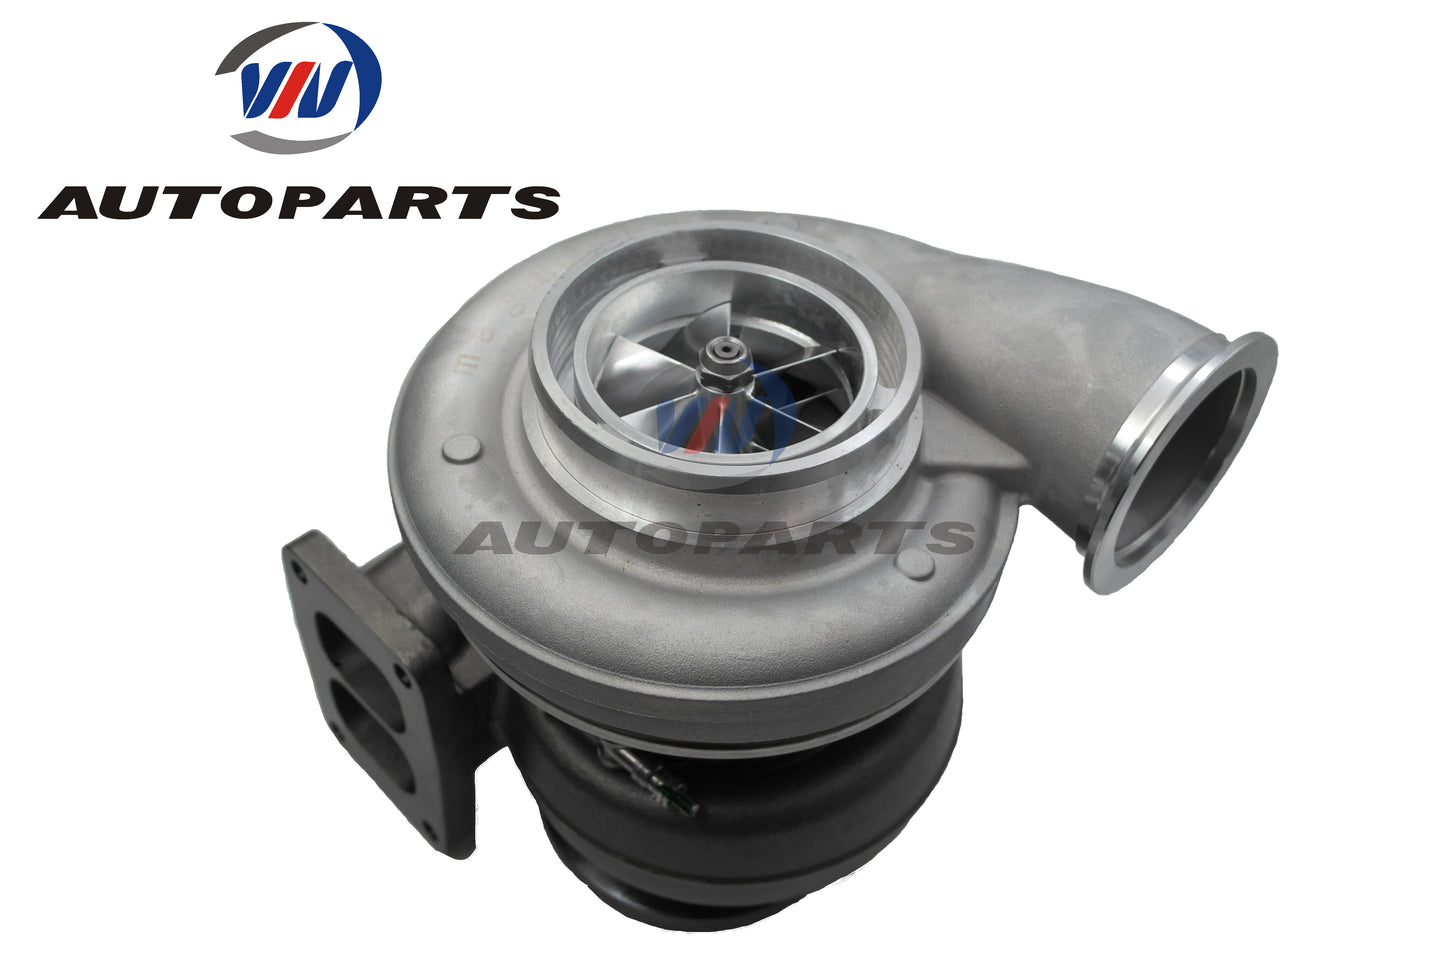 S400-SX4 80mm Billet Upgraded 360 Thrust Bearing S400 Turbocharger With T6 1.32 A/R turbine For 600-1300 horse power